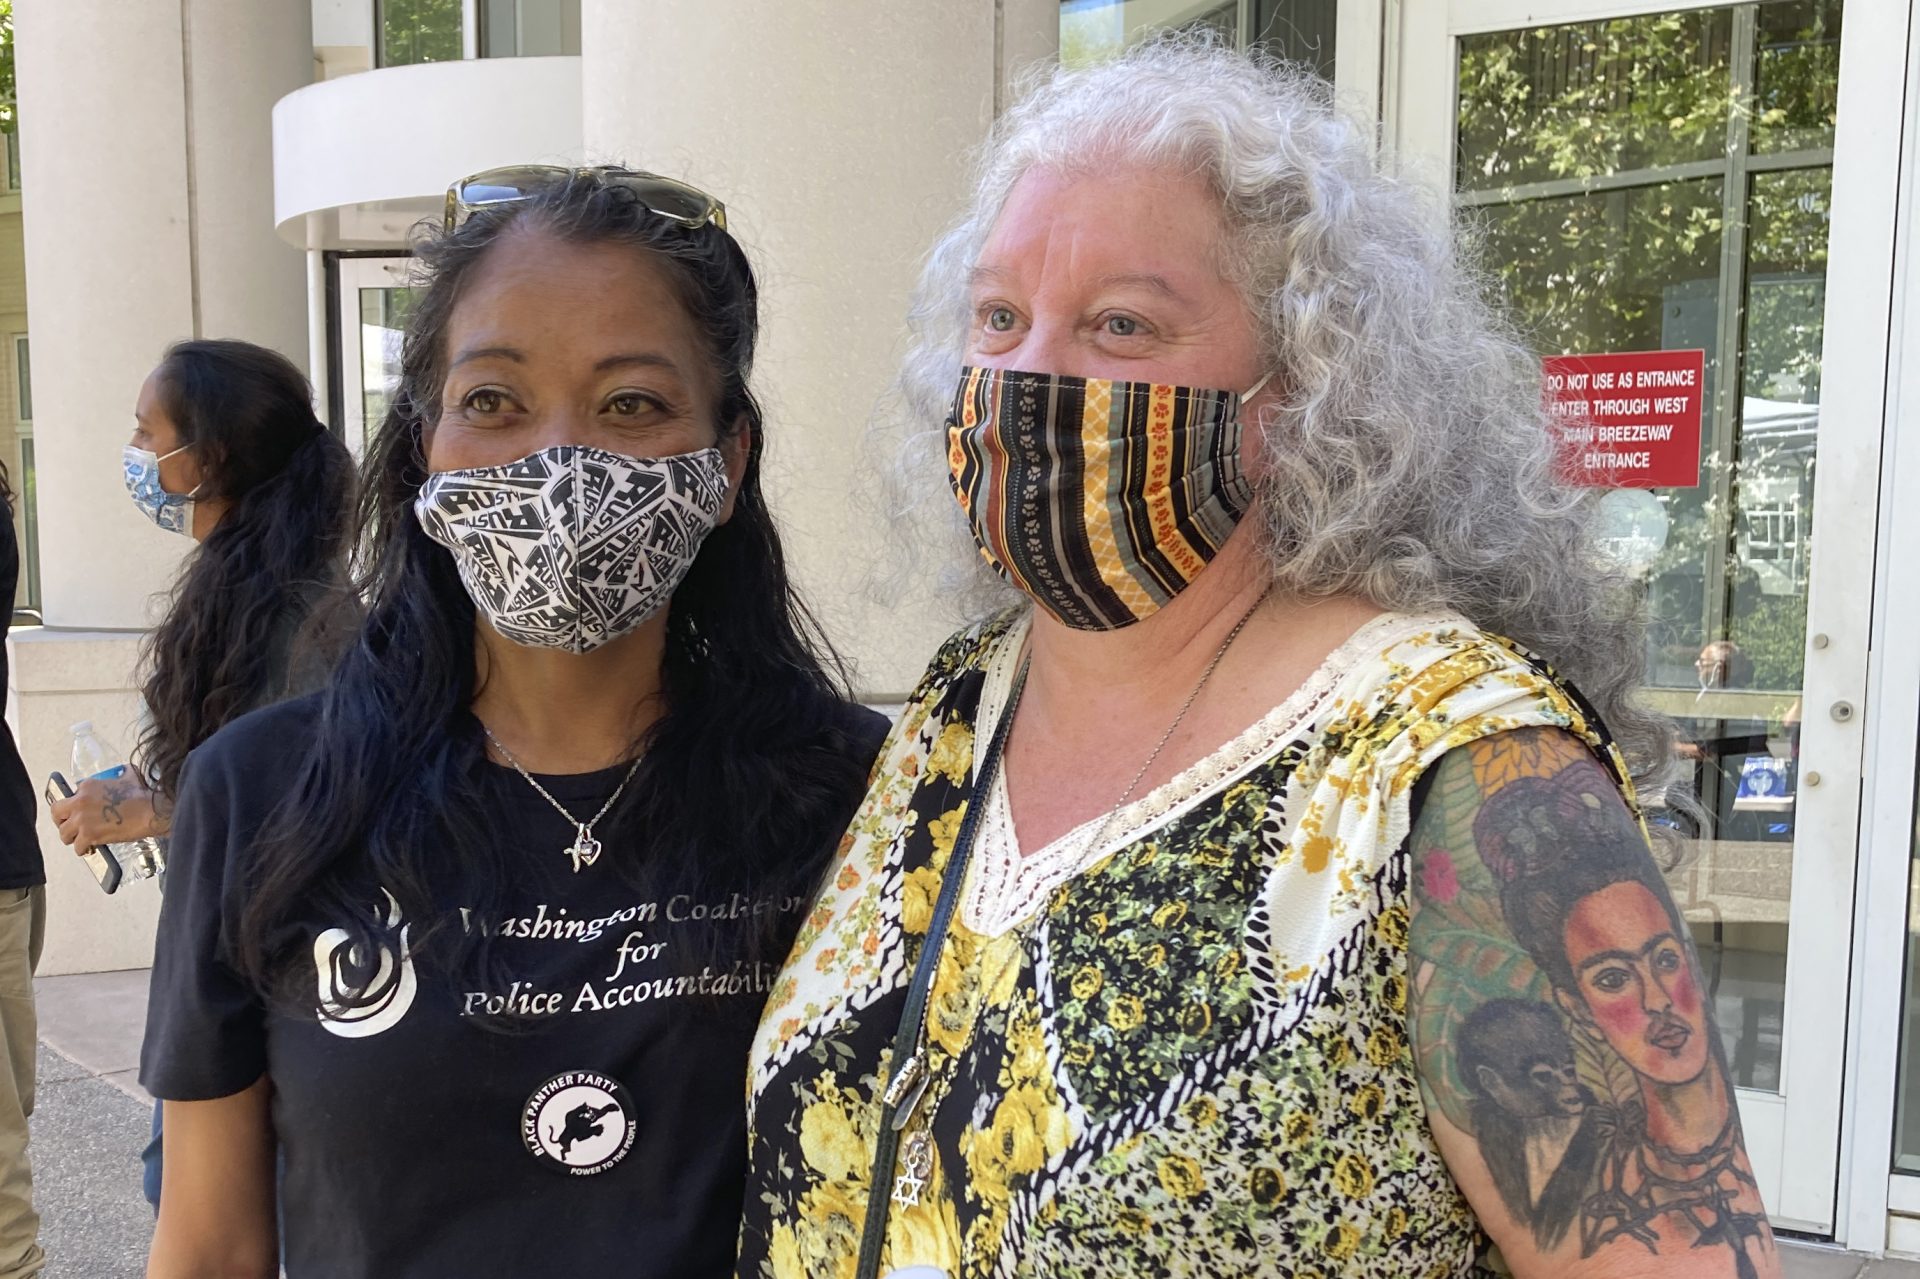 Kari Sarey, left, the mother of Jesse Sarey — who was killed by Auburn police Officer Jeff Nelson in 2019 — stands with Elaine Simons, who briefly fostered Jesse Sarey when he was young, Thursday, June 3, 2021, outside the Maleng Regional Justice Center in Kent, Wash. 